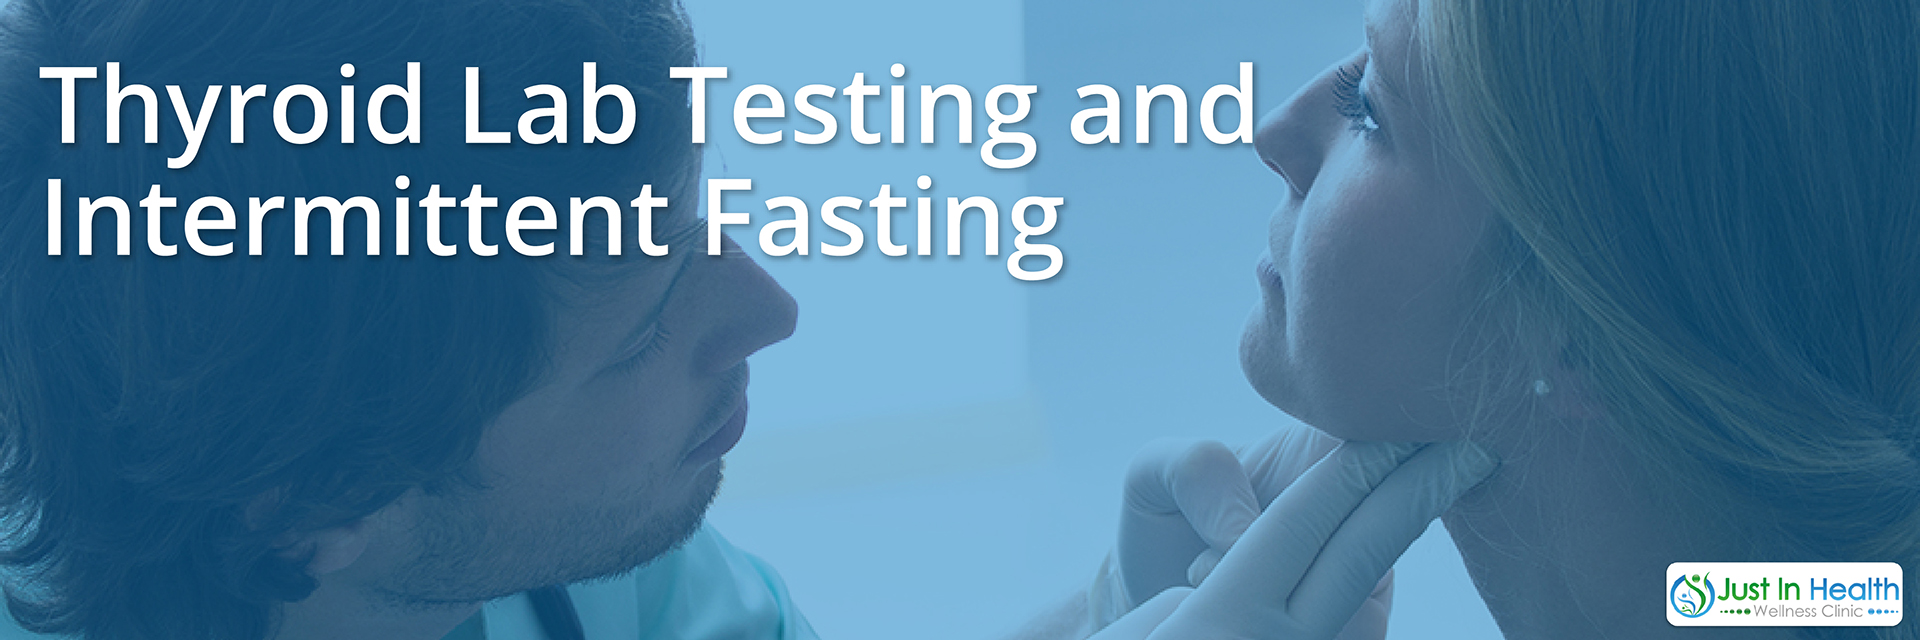 Thyroid Lab Testing And intermittent Fasting